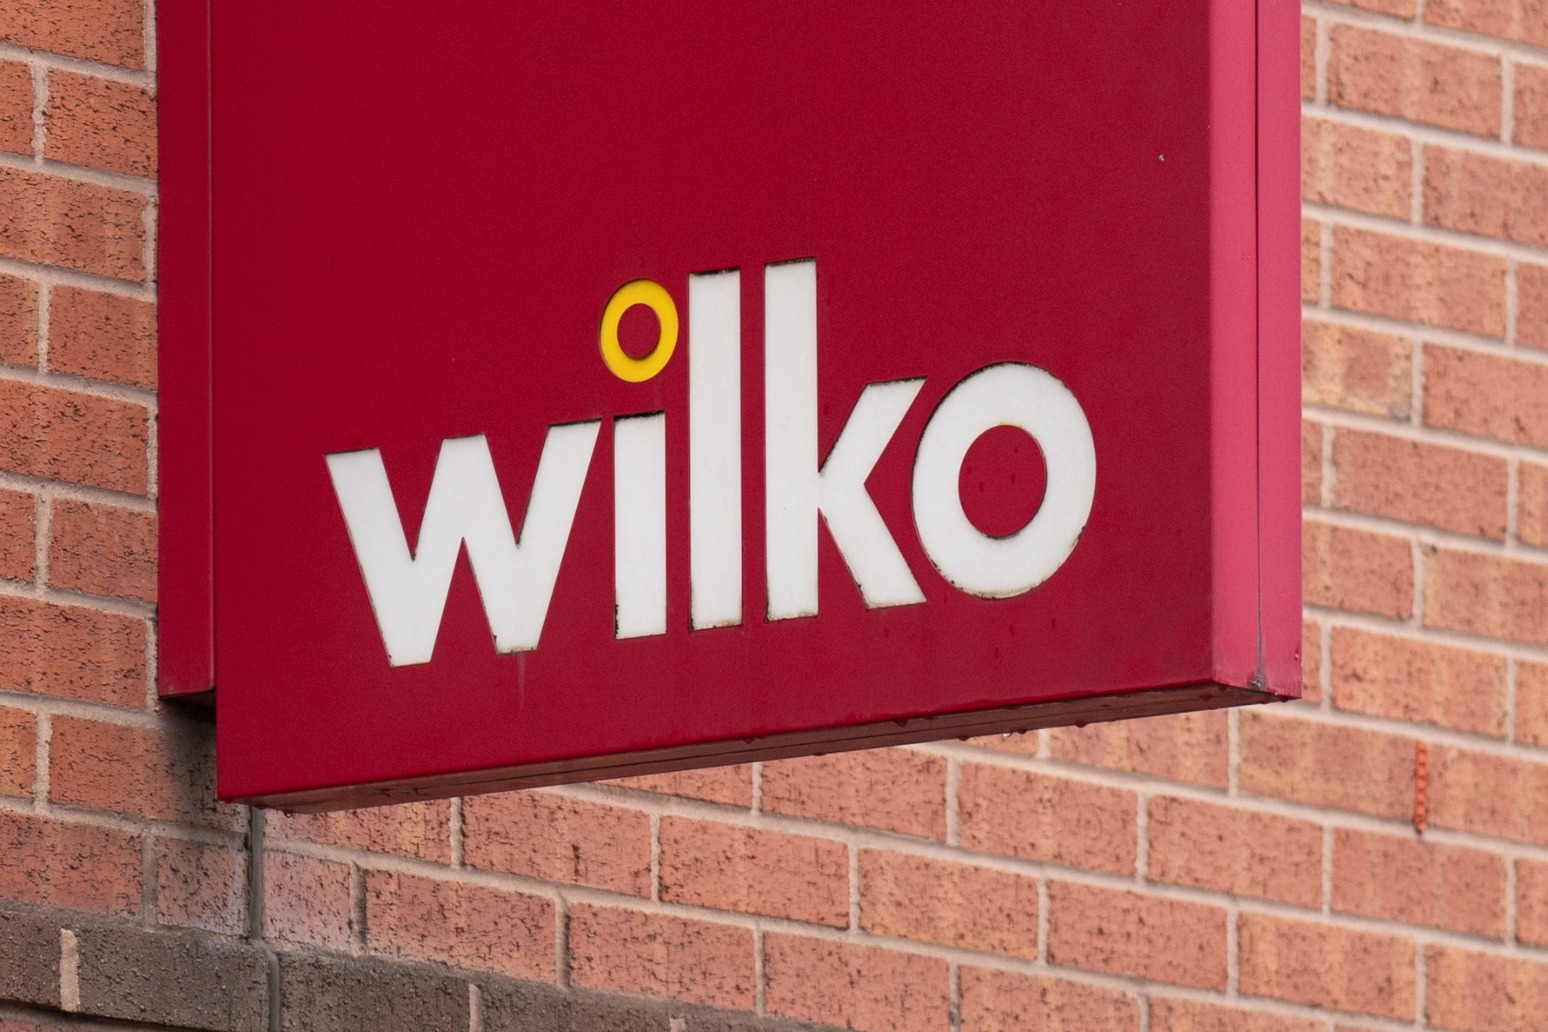 Former Wilko shops witness ‘amazing’ sales after reopening, says Poundland boss 